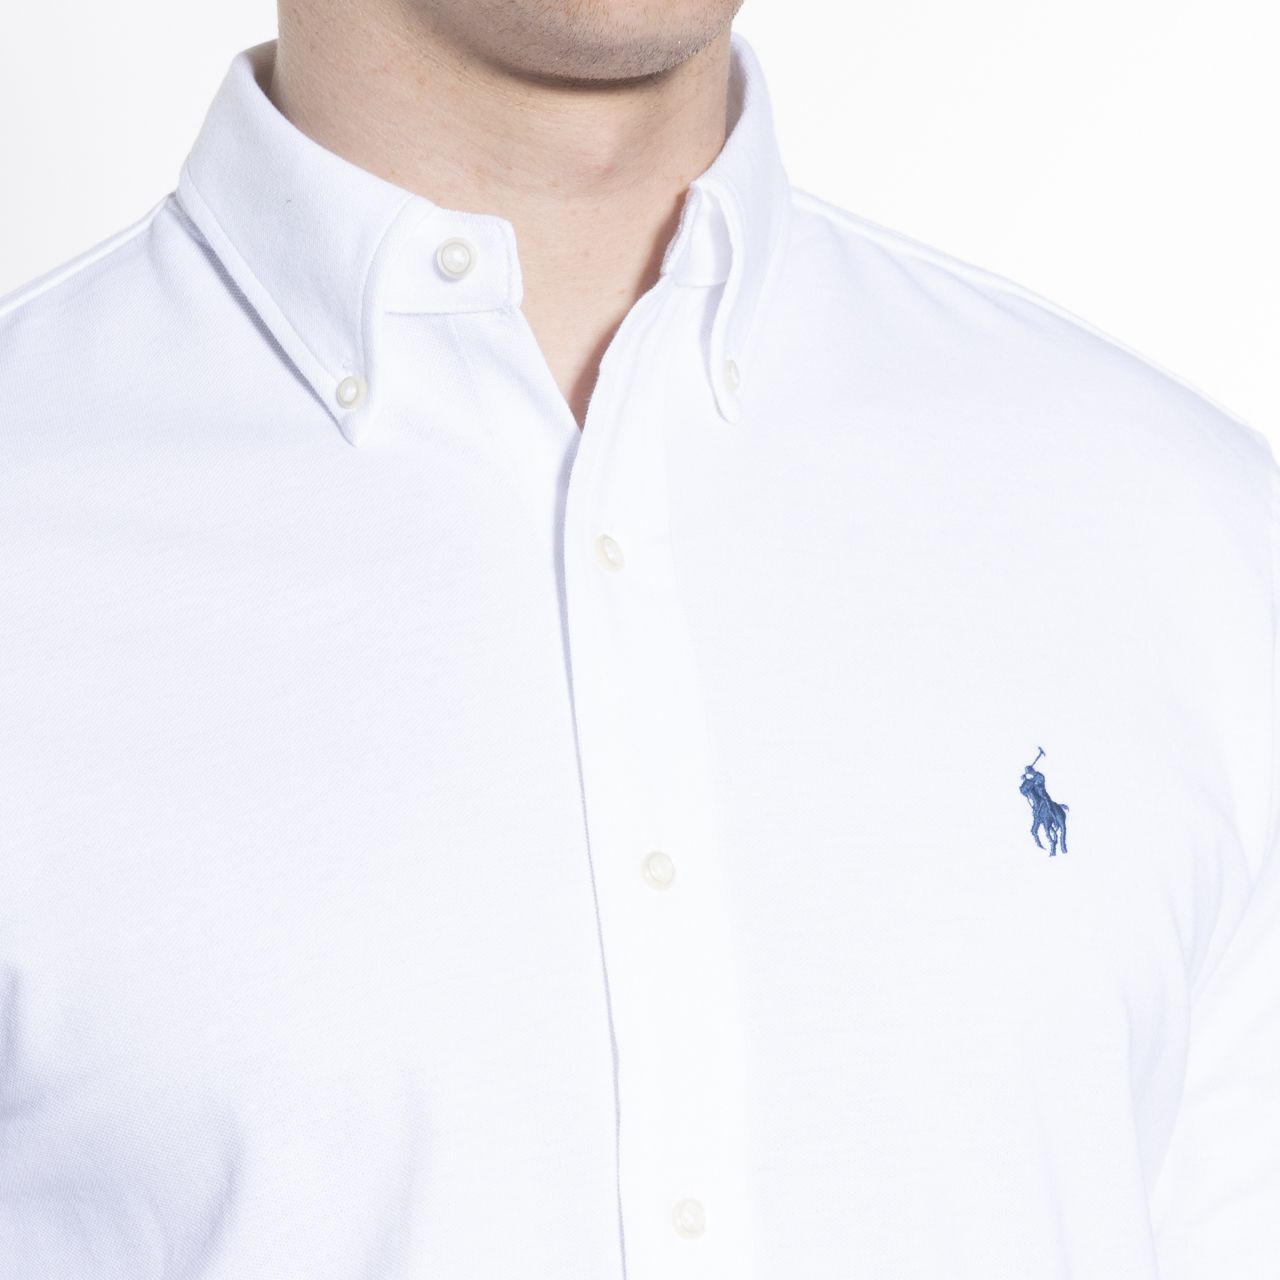 Polo Ralph Lauren Casual overhemd LM  Wit 058445-001-L